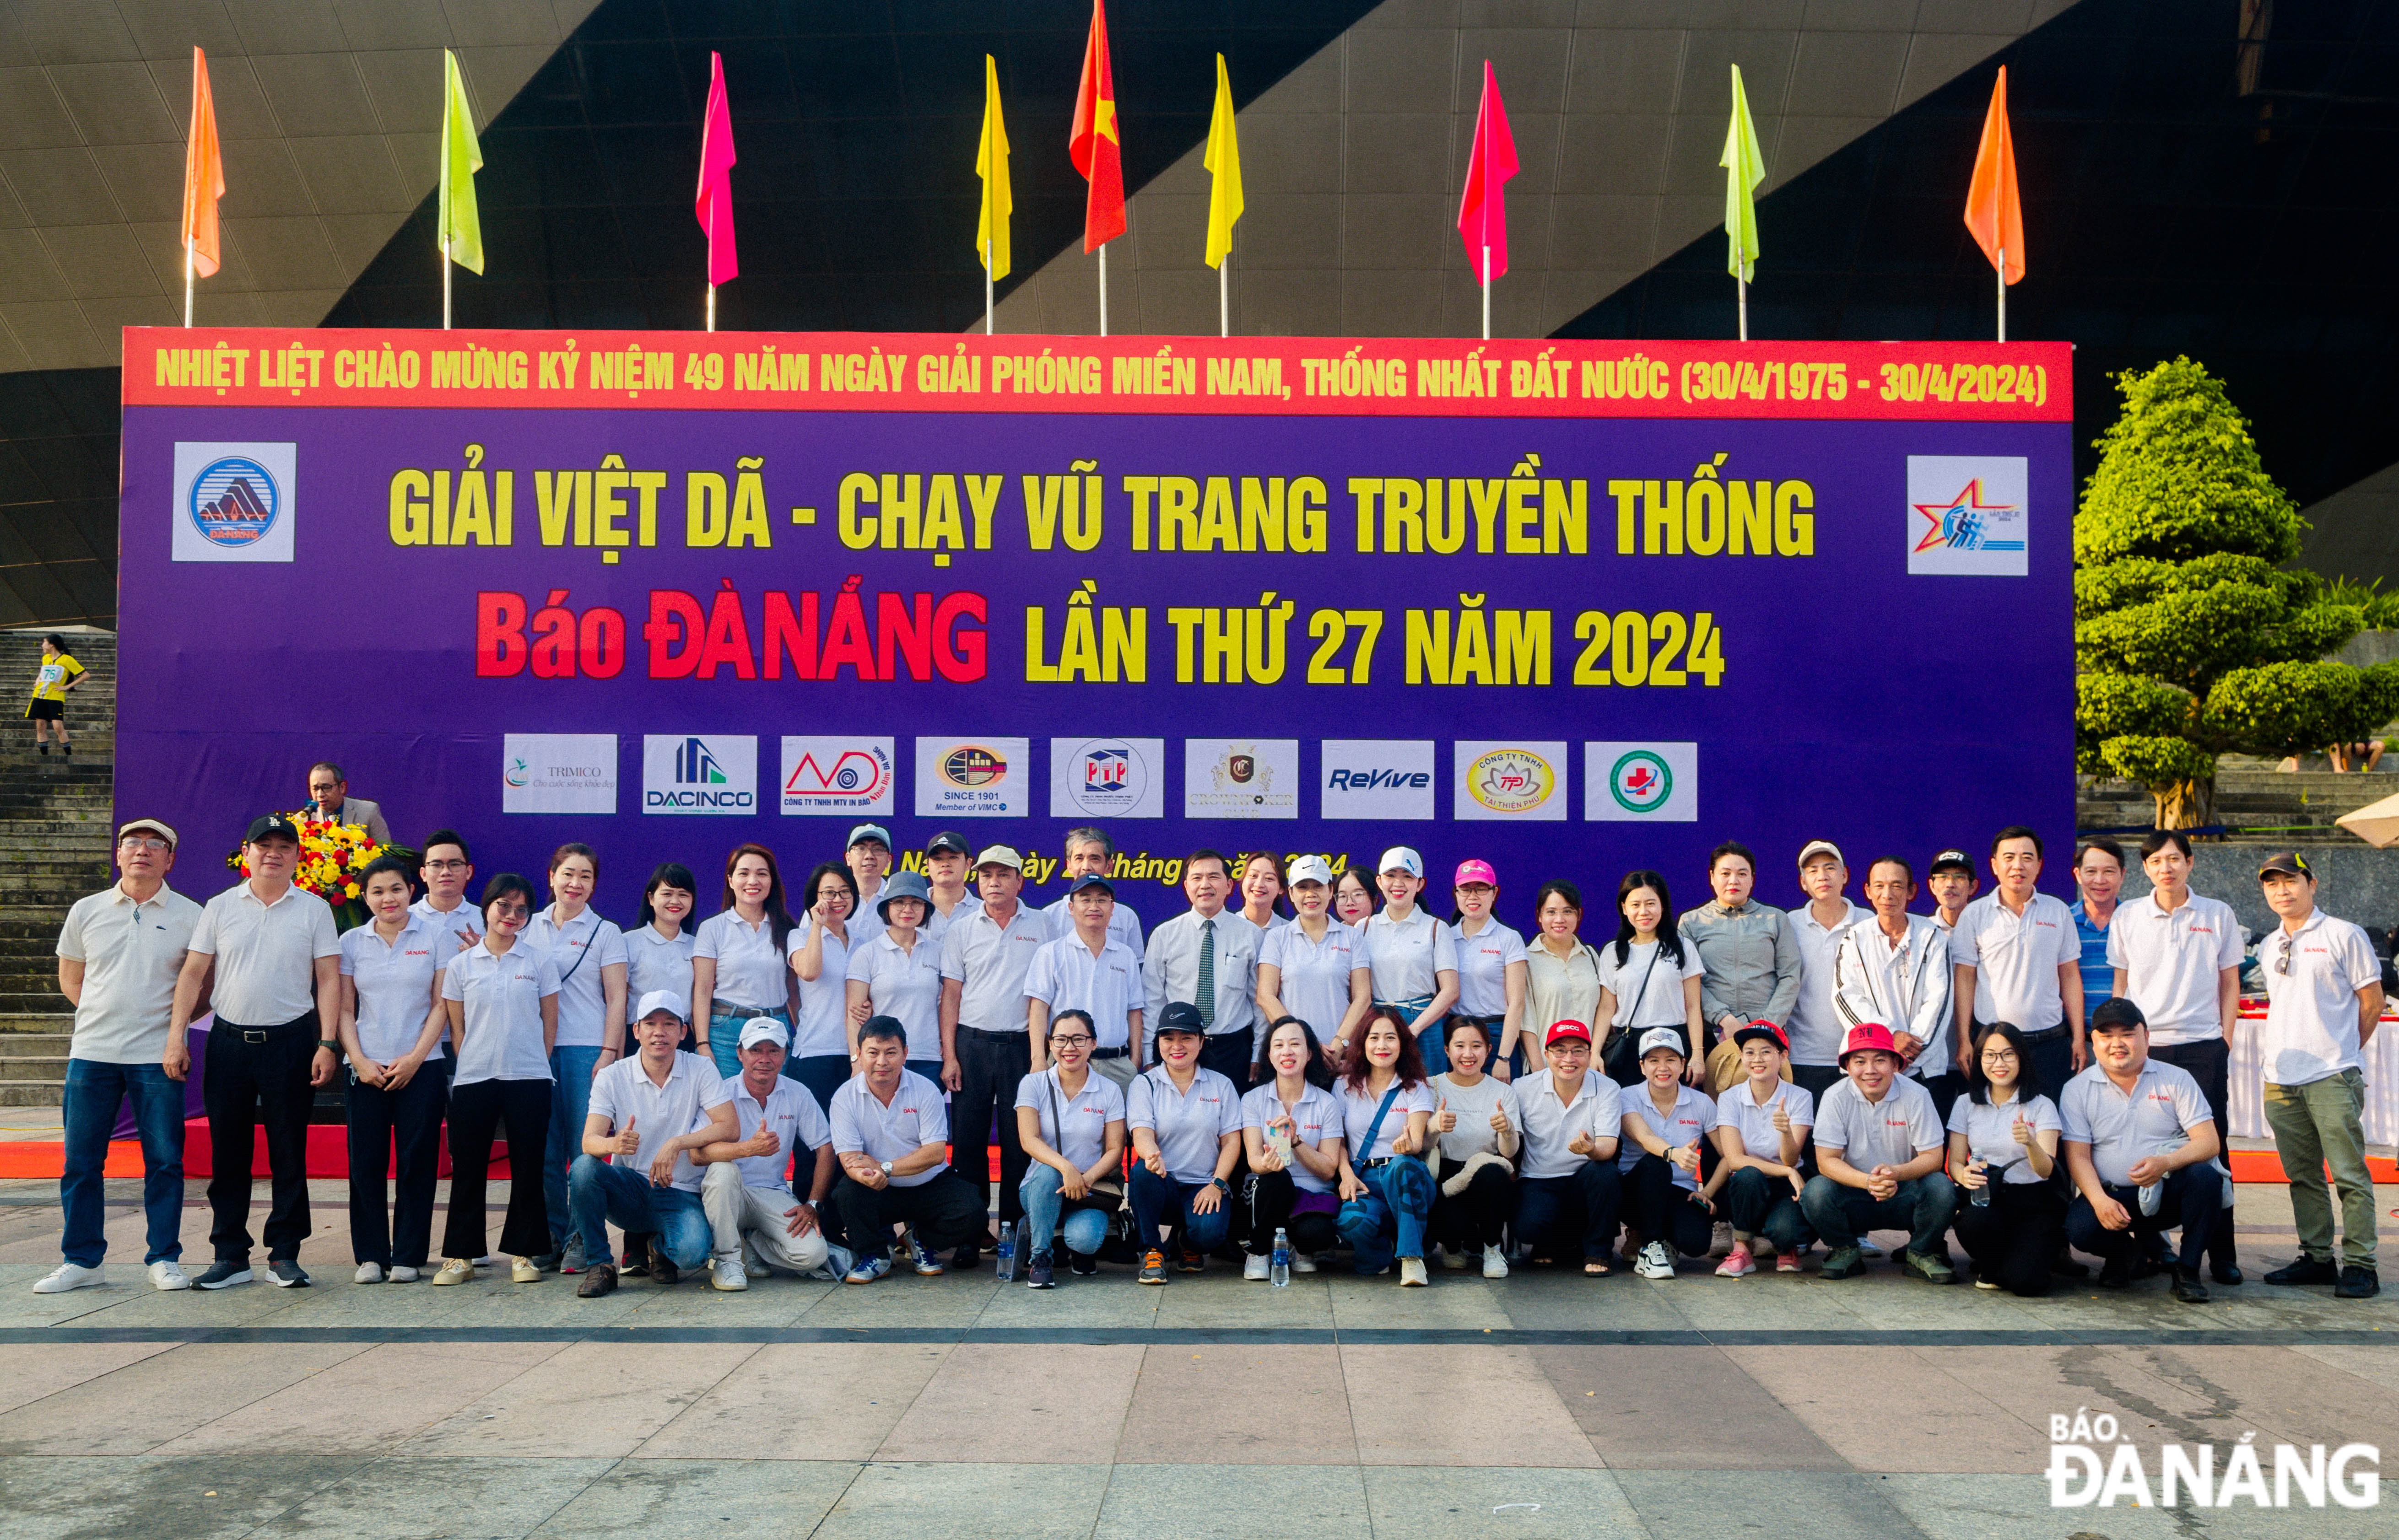 Officials and employees of the Da Nang Newspaper posing for a souvenir photo before the opening ceremony of the 27th Da Nang Newspaper Road Races in 2024.